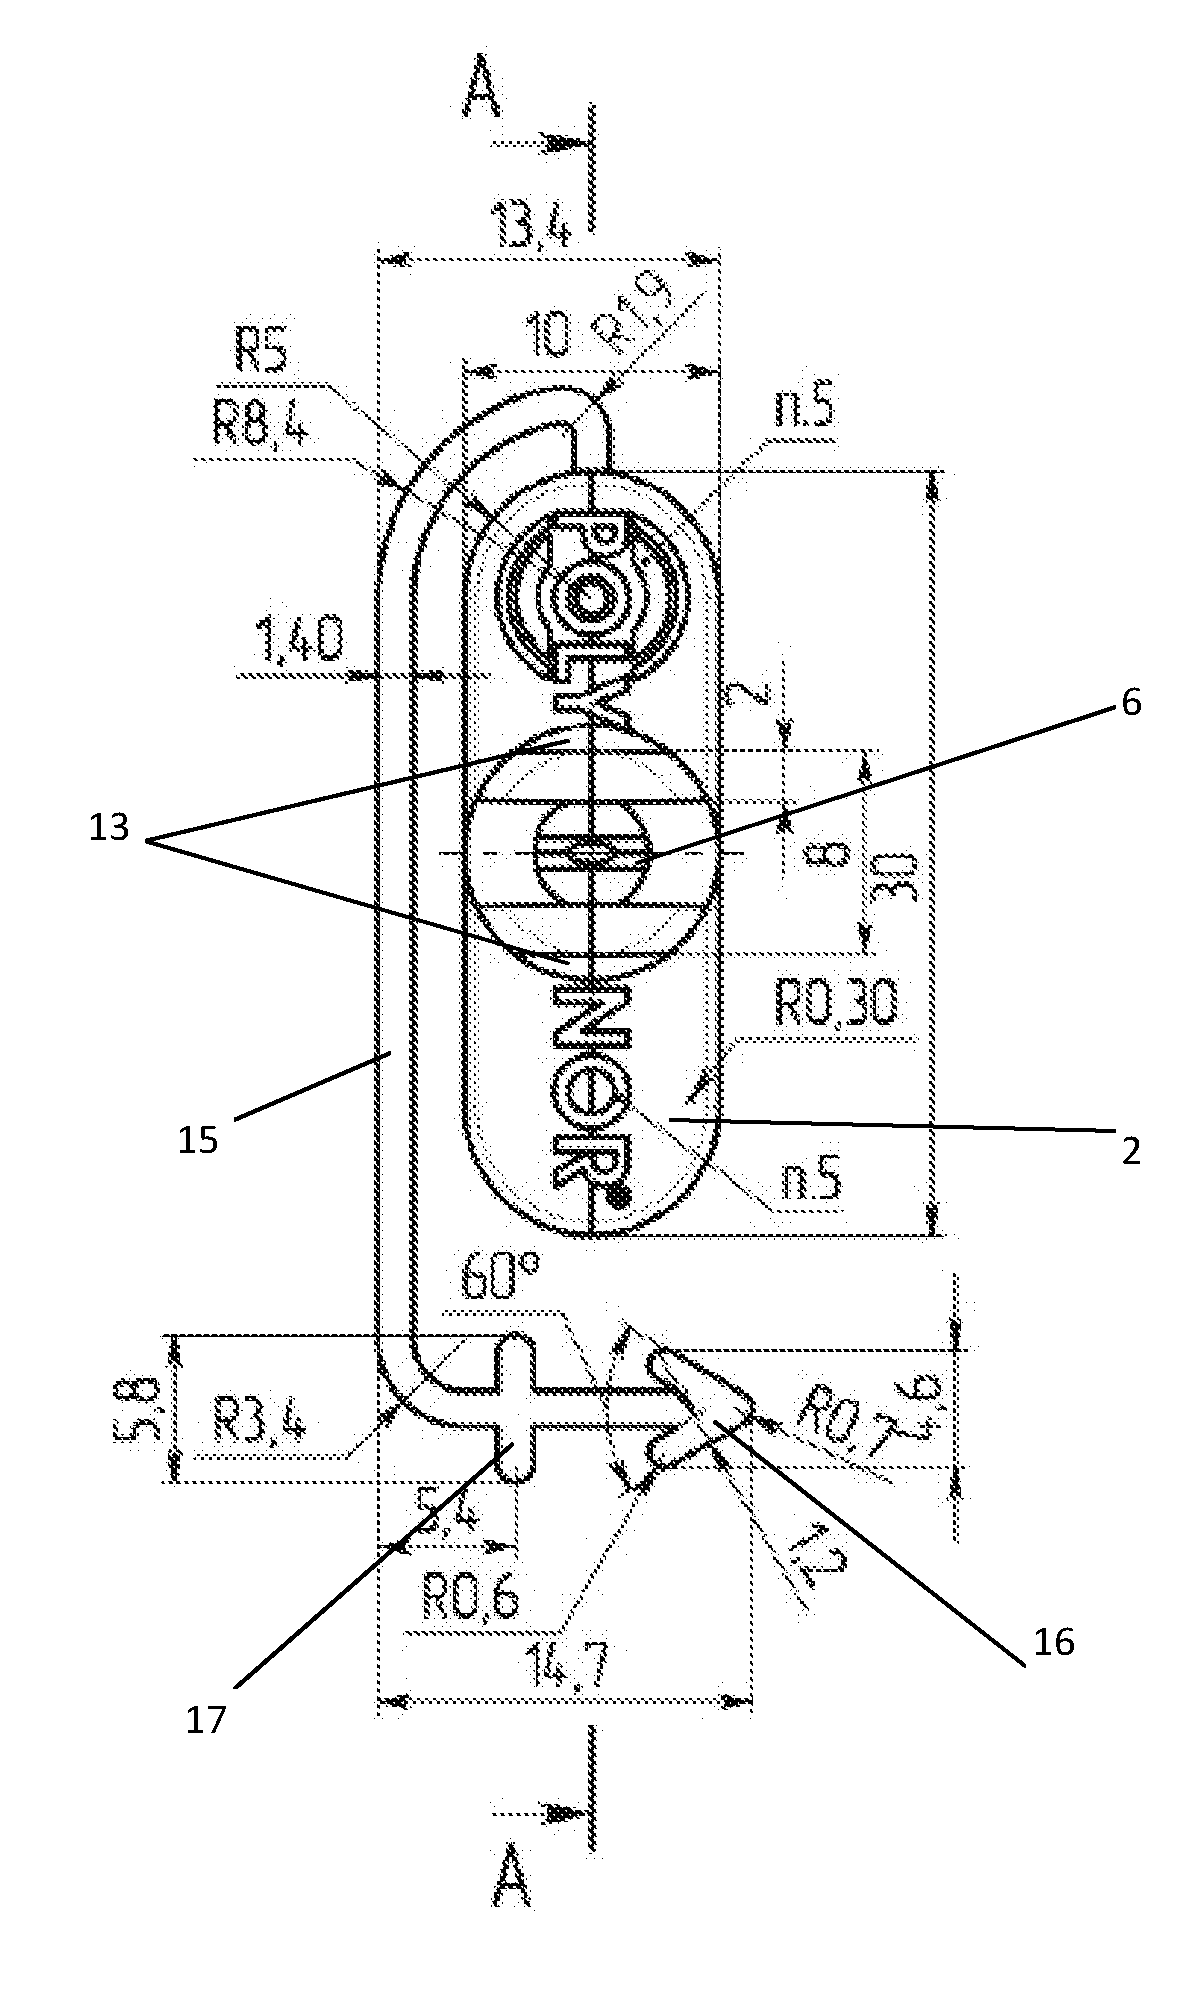 Device for Spraying Pressurized Material